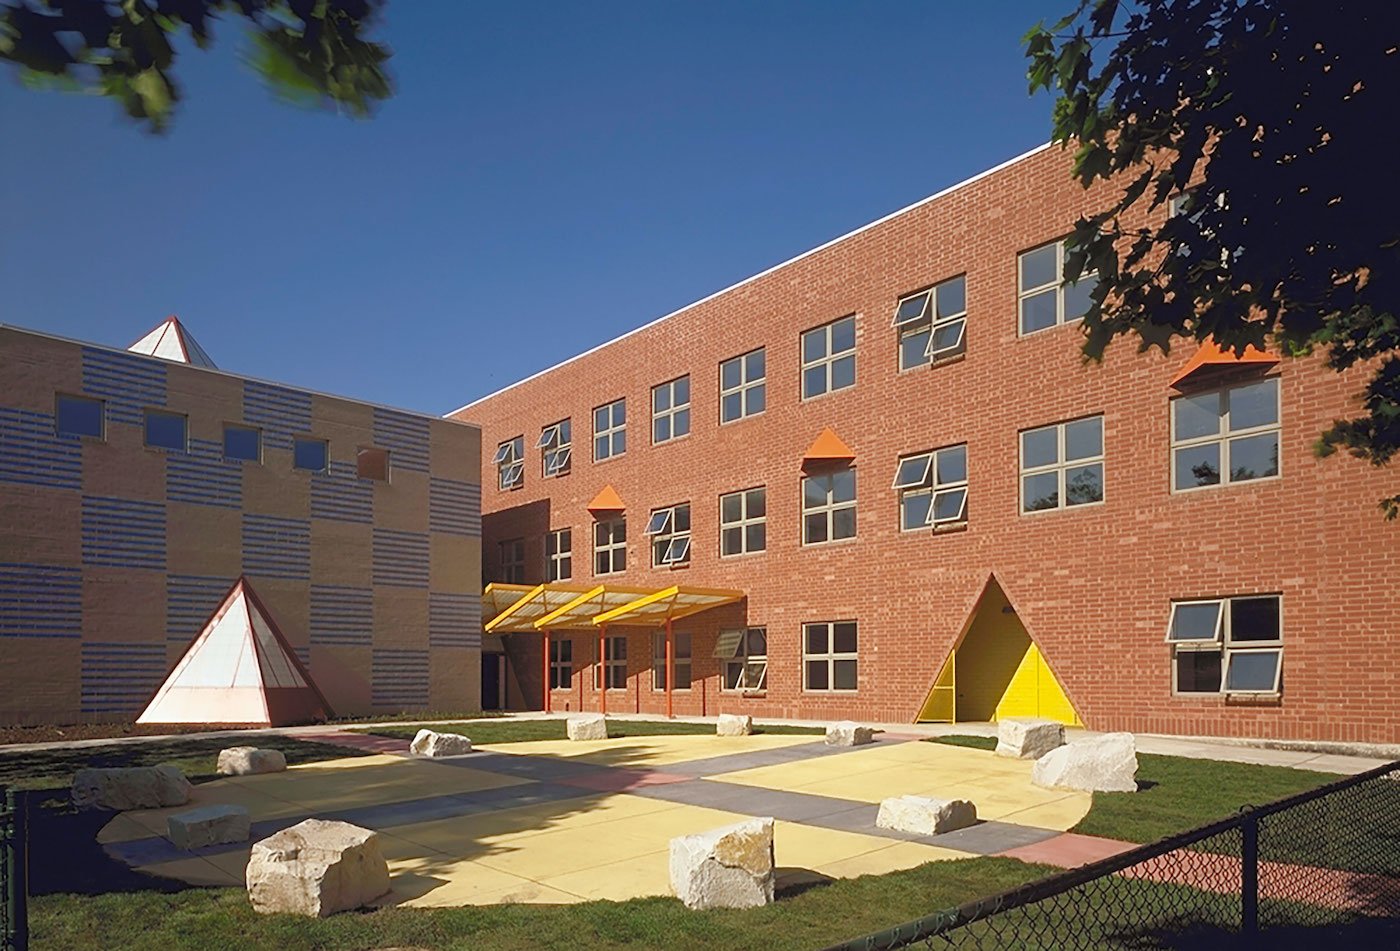 Cesar Chavez Multicultural Academic Center, with pyramid-shaped windows